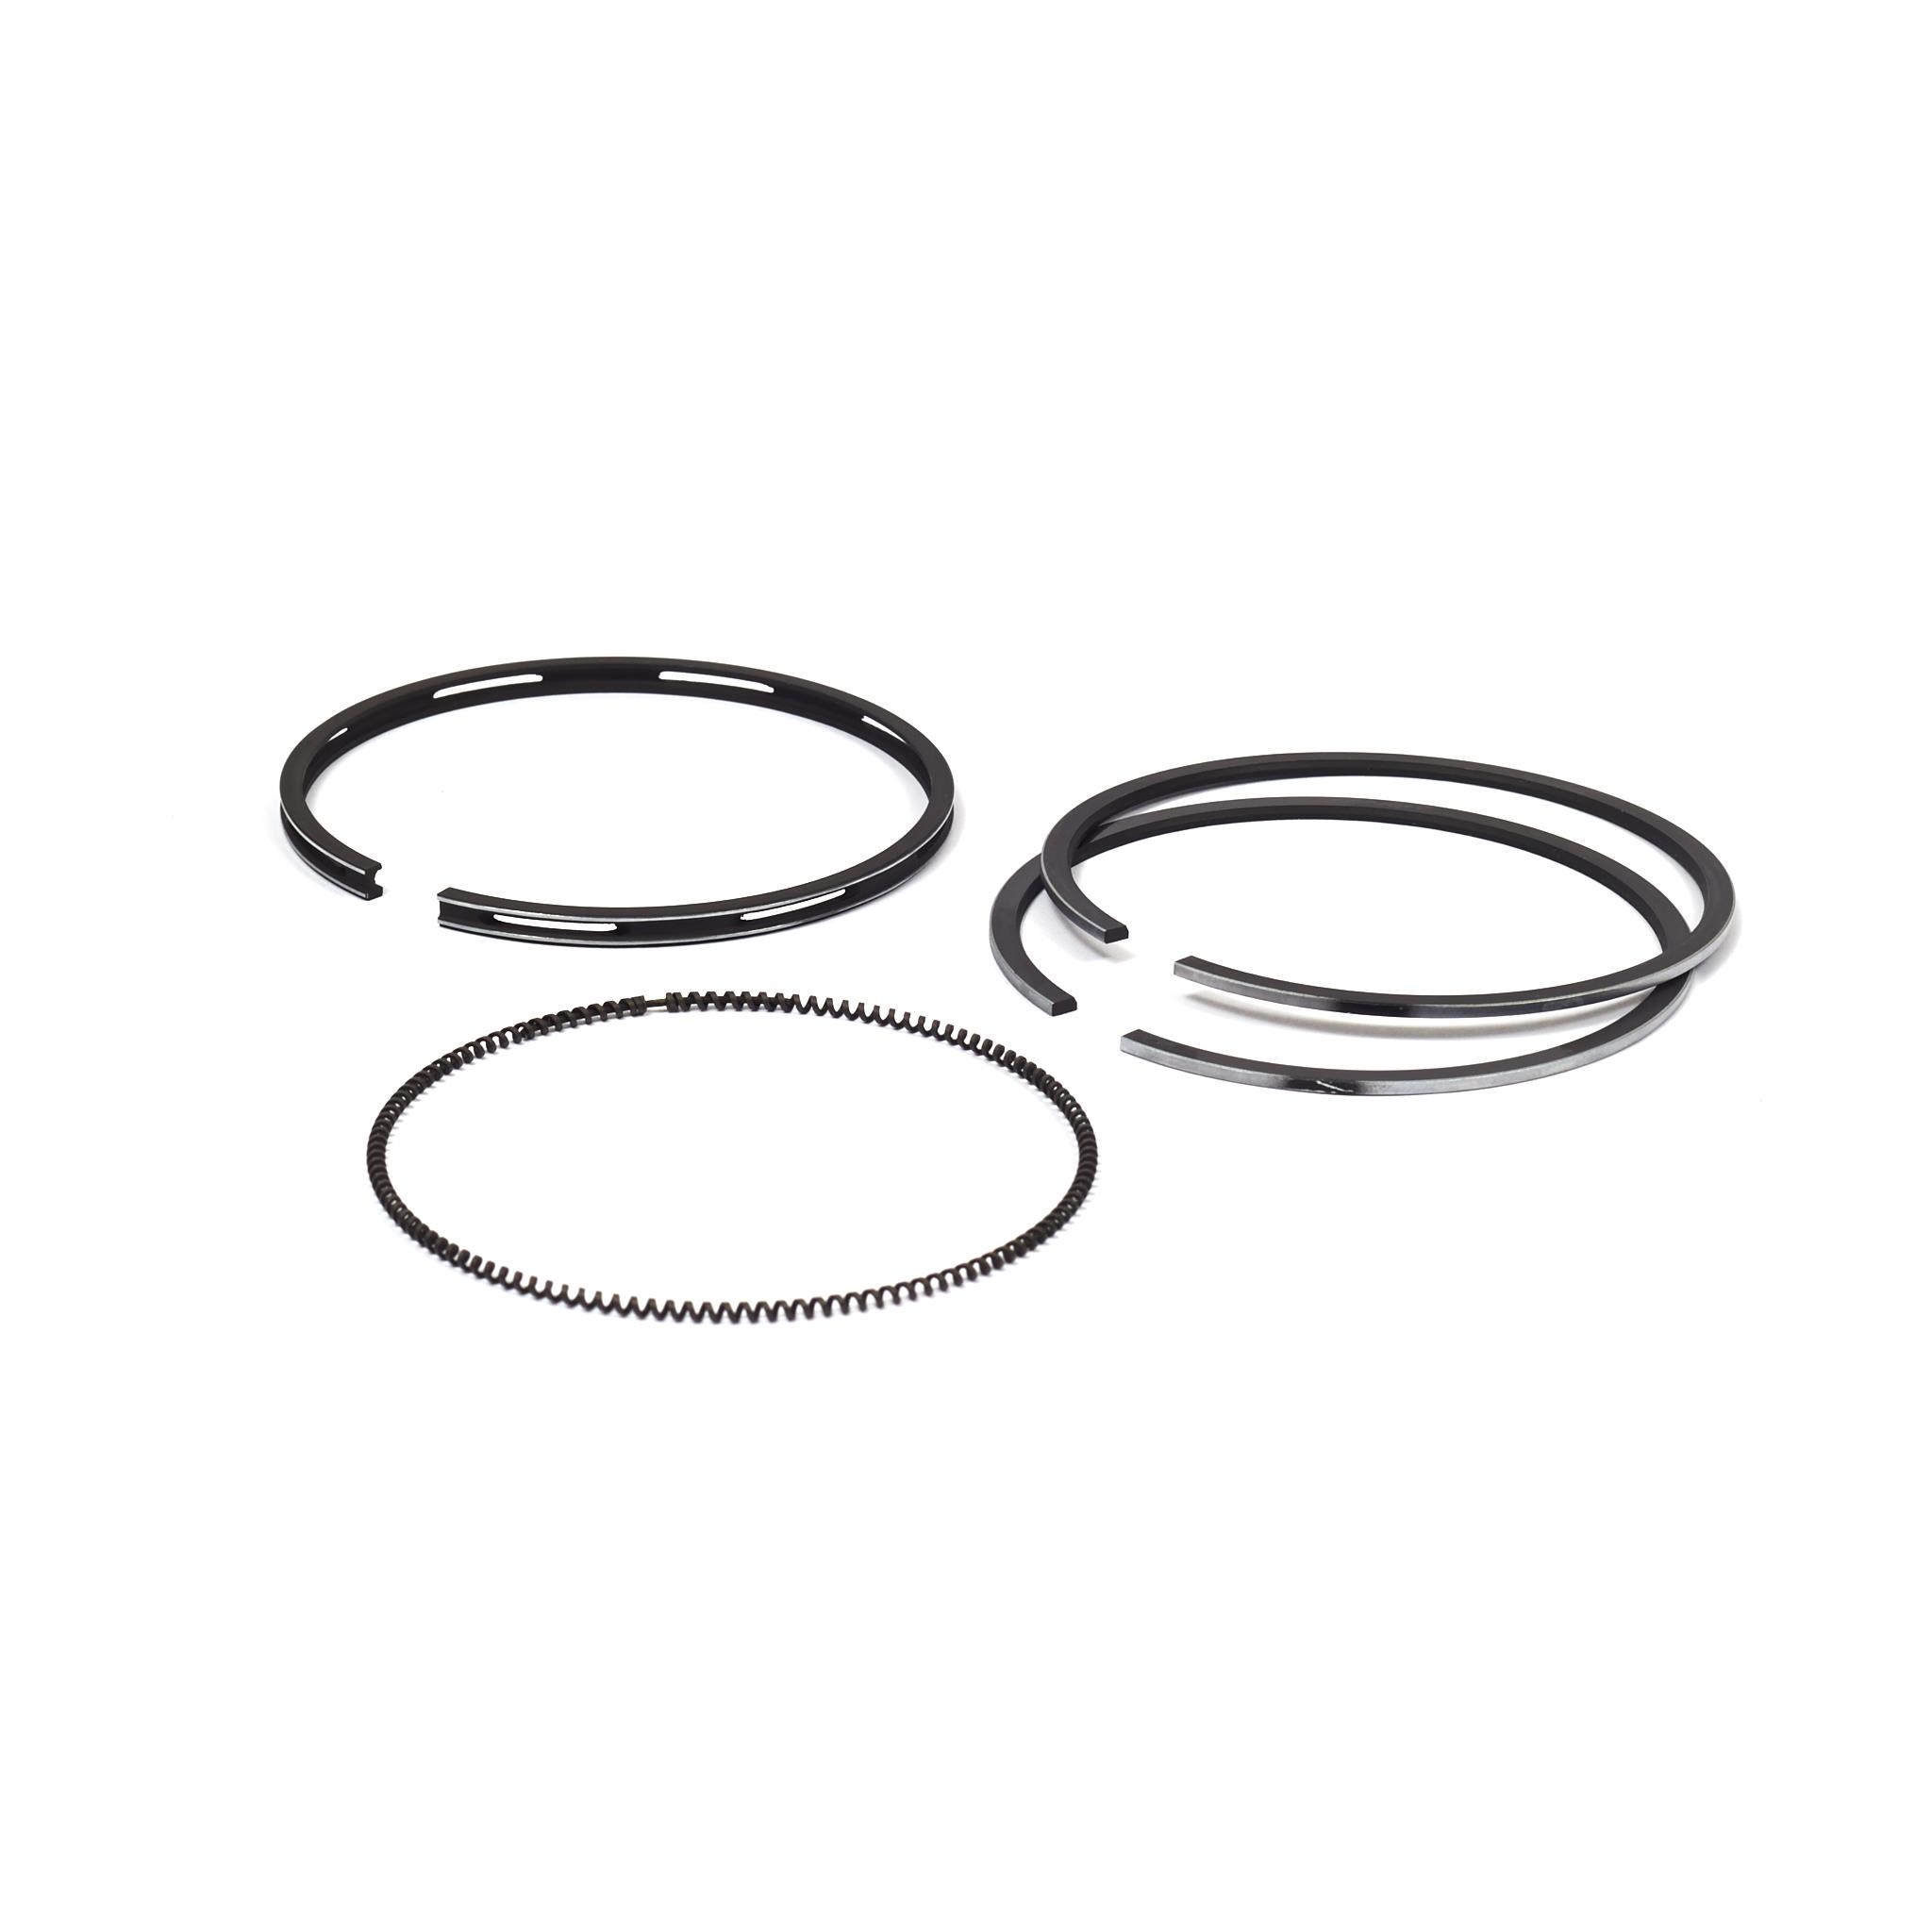 RING SET part# 792366 by Briggs & Stratton